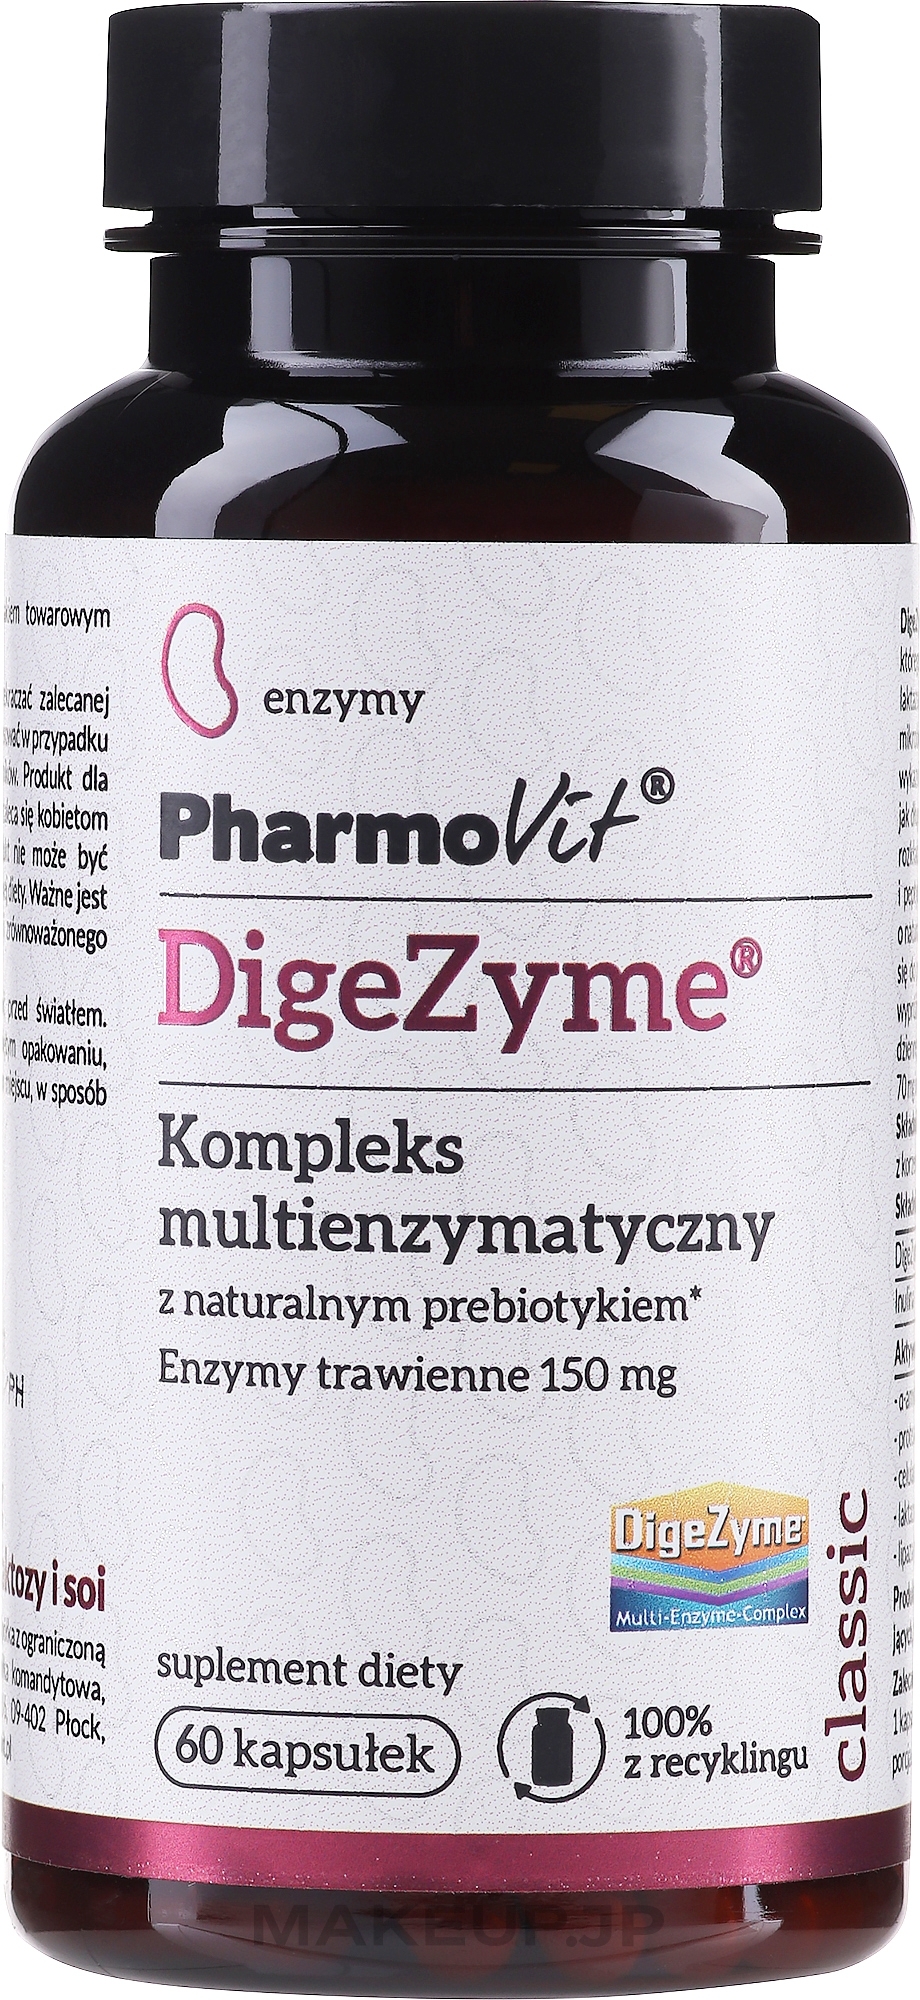 Multi-Enzyme Complex with Natural Prebiotic, 150 mg - Pharmovit Classic DigeZyme — photo 60 szt.